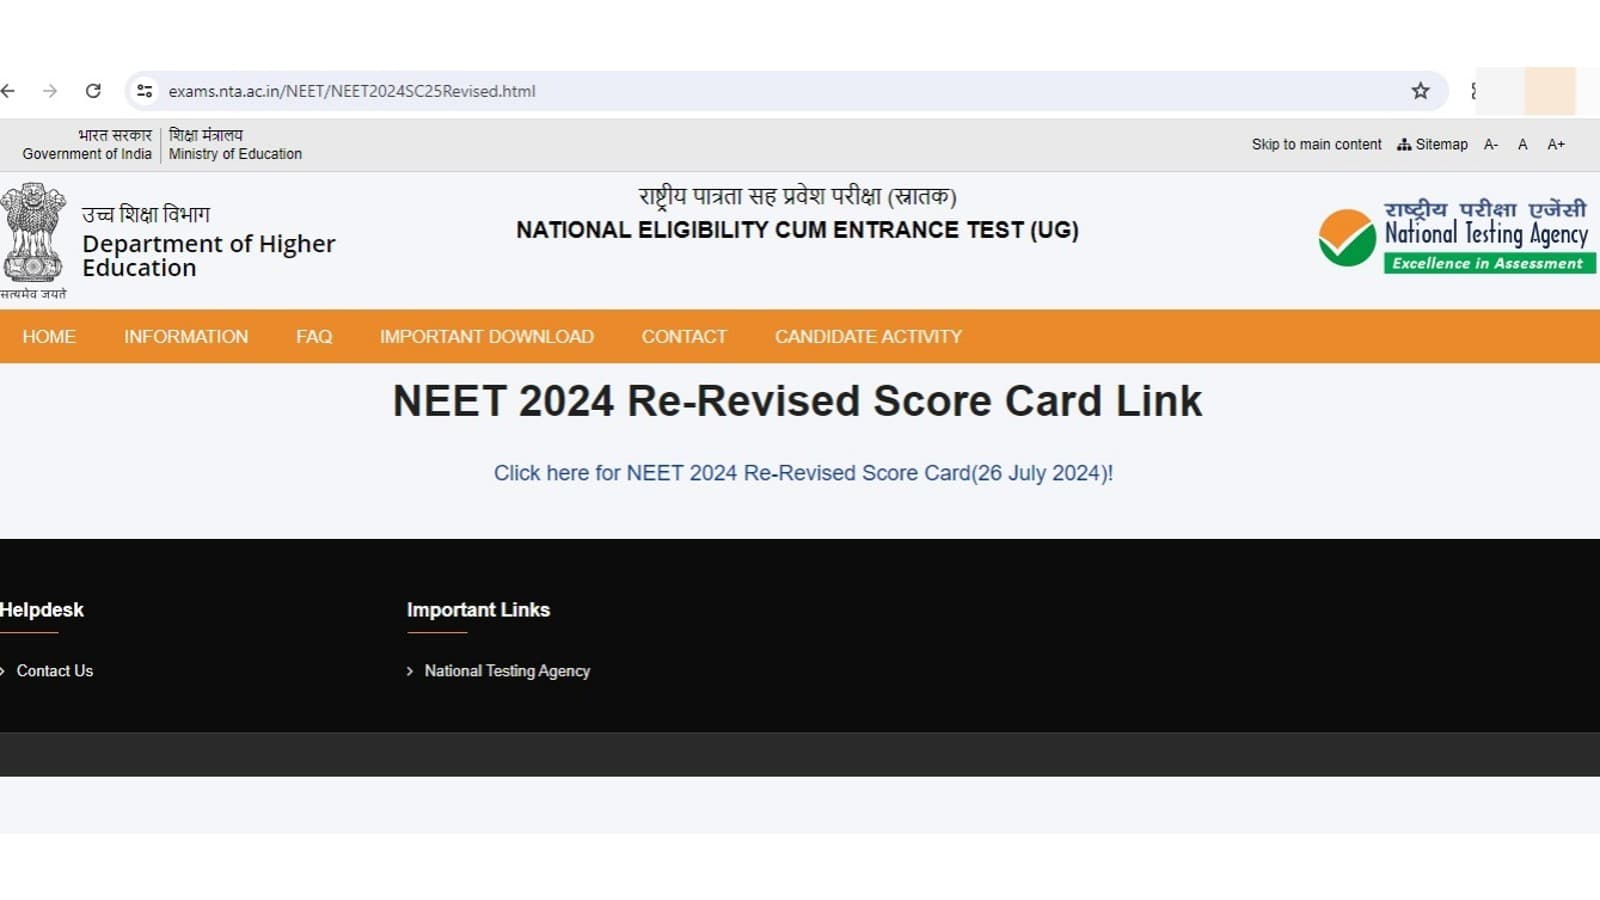 NTA releases NEET UG re-revised scorecard, final answer key at exam.nta.ac.in